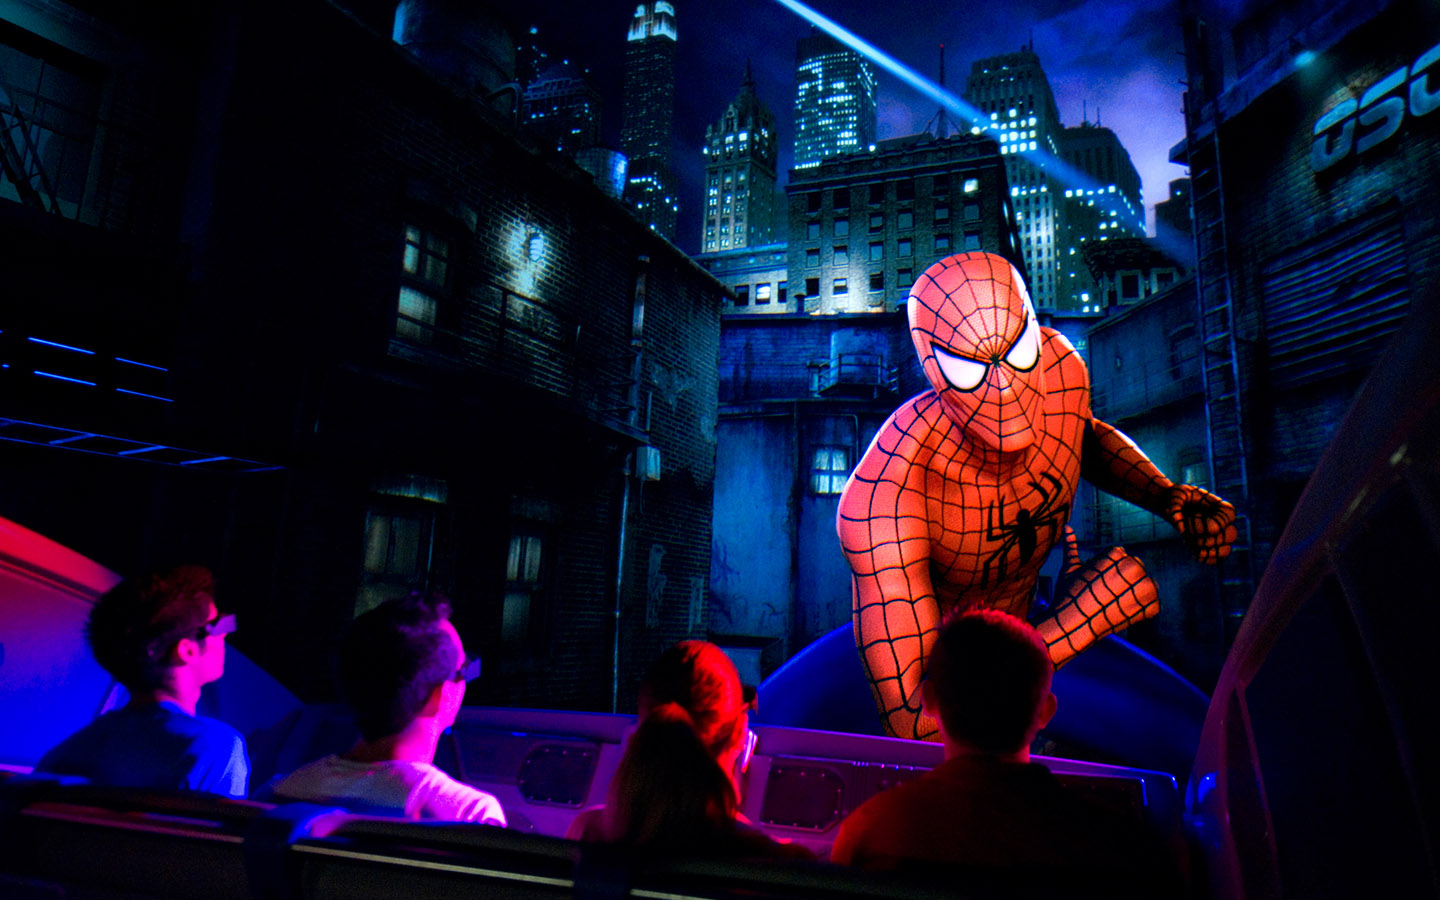 Swing through the streets of New York with Spider-Man on The Amazing Adventures of Spider-Man at Universal's Islands of Adventure